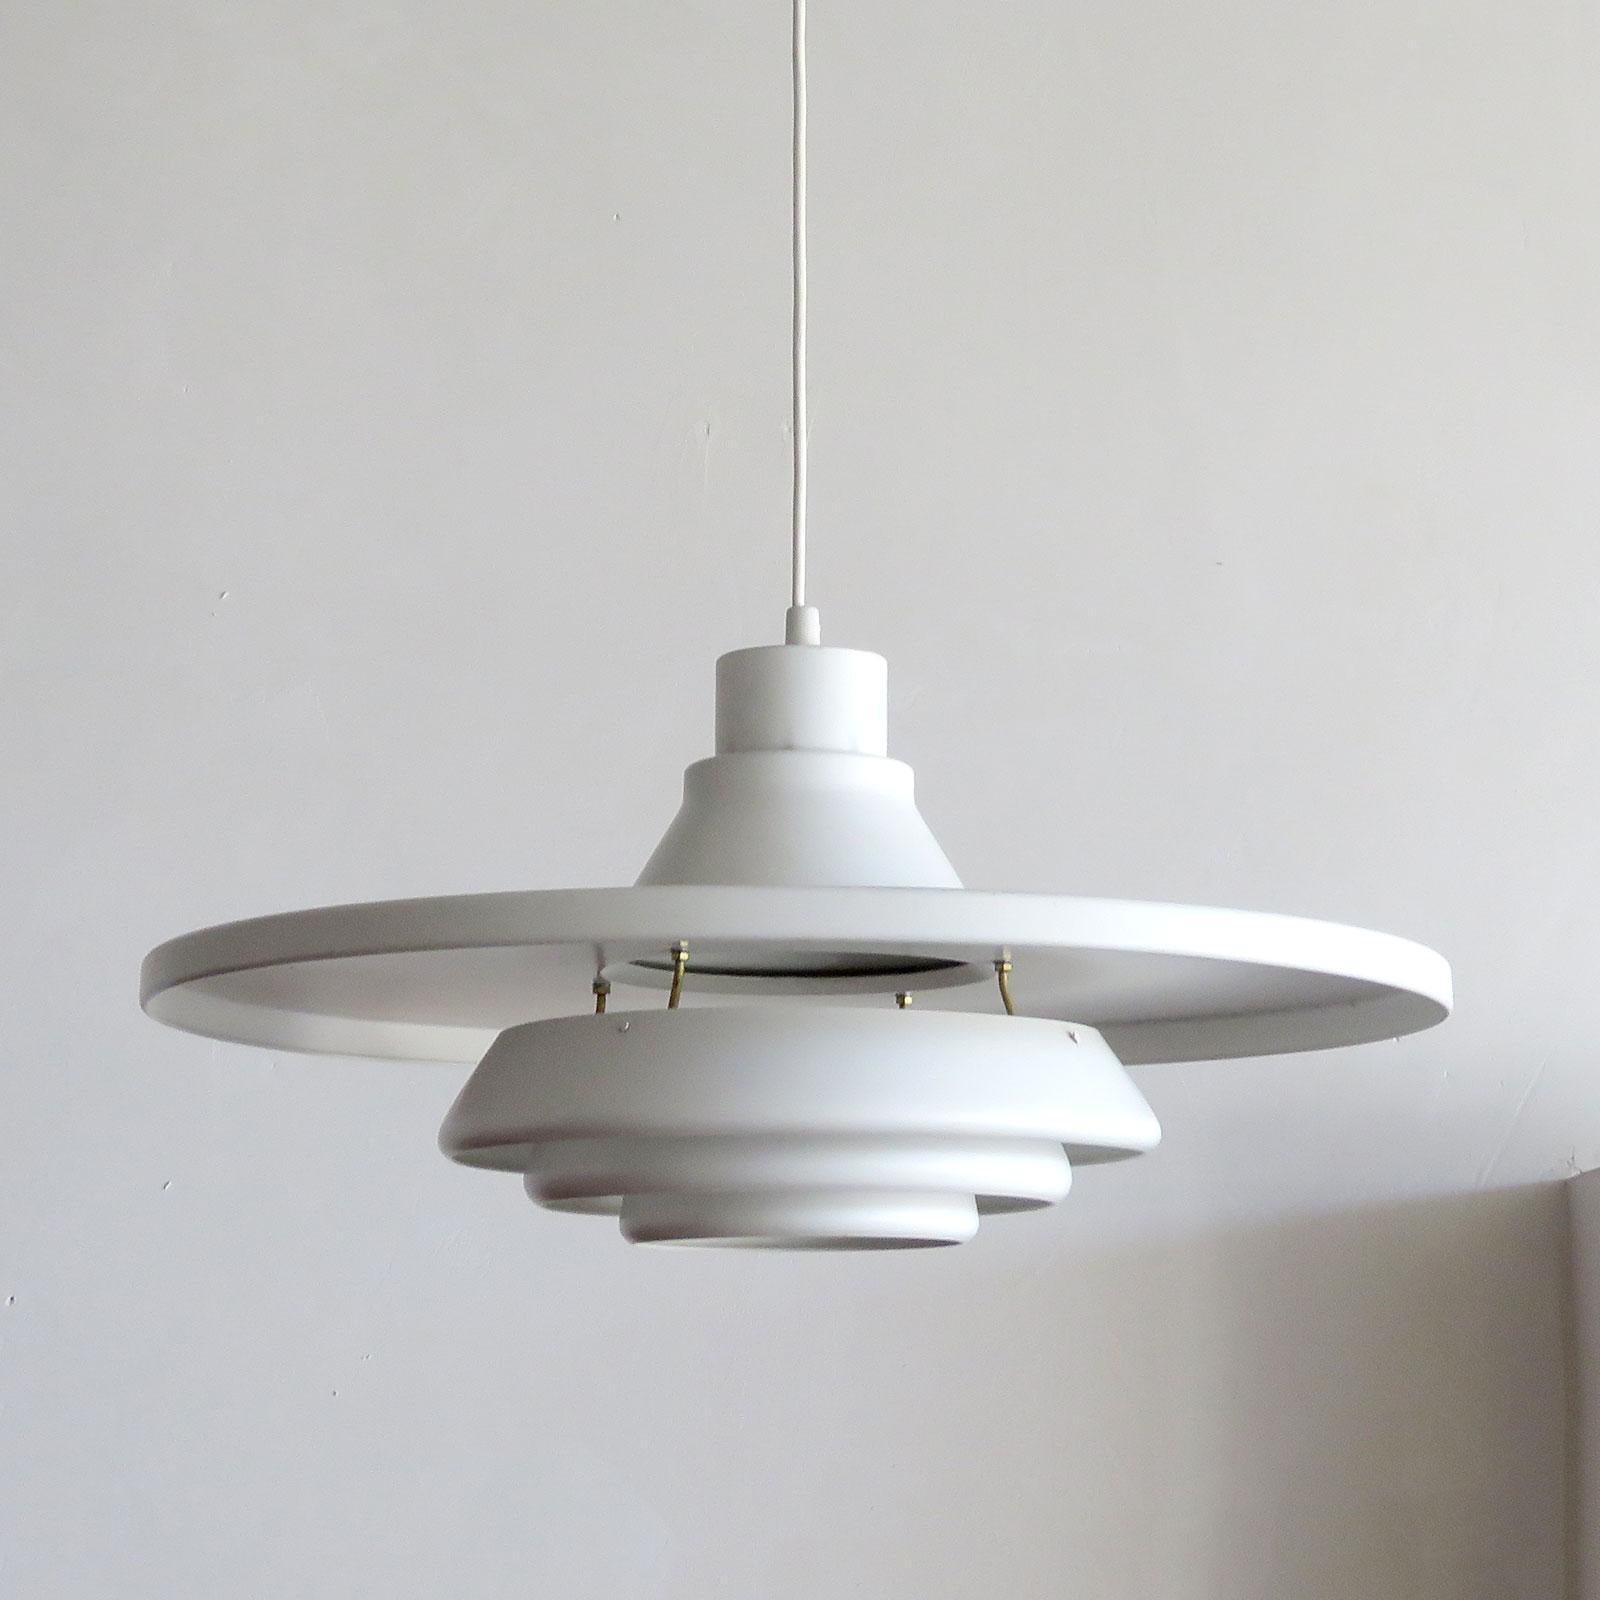 Wonderful 'Flying Saucer' Model A337, ceiling lamp by Alvar Aalto, early example by original manufacture Valaisinpaja Oy, Finland, circa 1953, labelled with manufacture's mark, wired for US standards, one E27 socket, max. wattage 100w, bulb provided